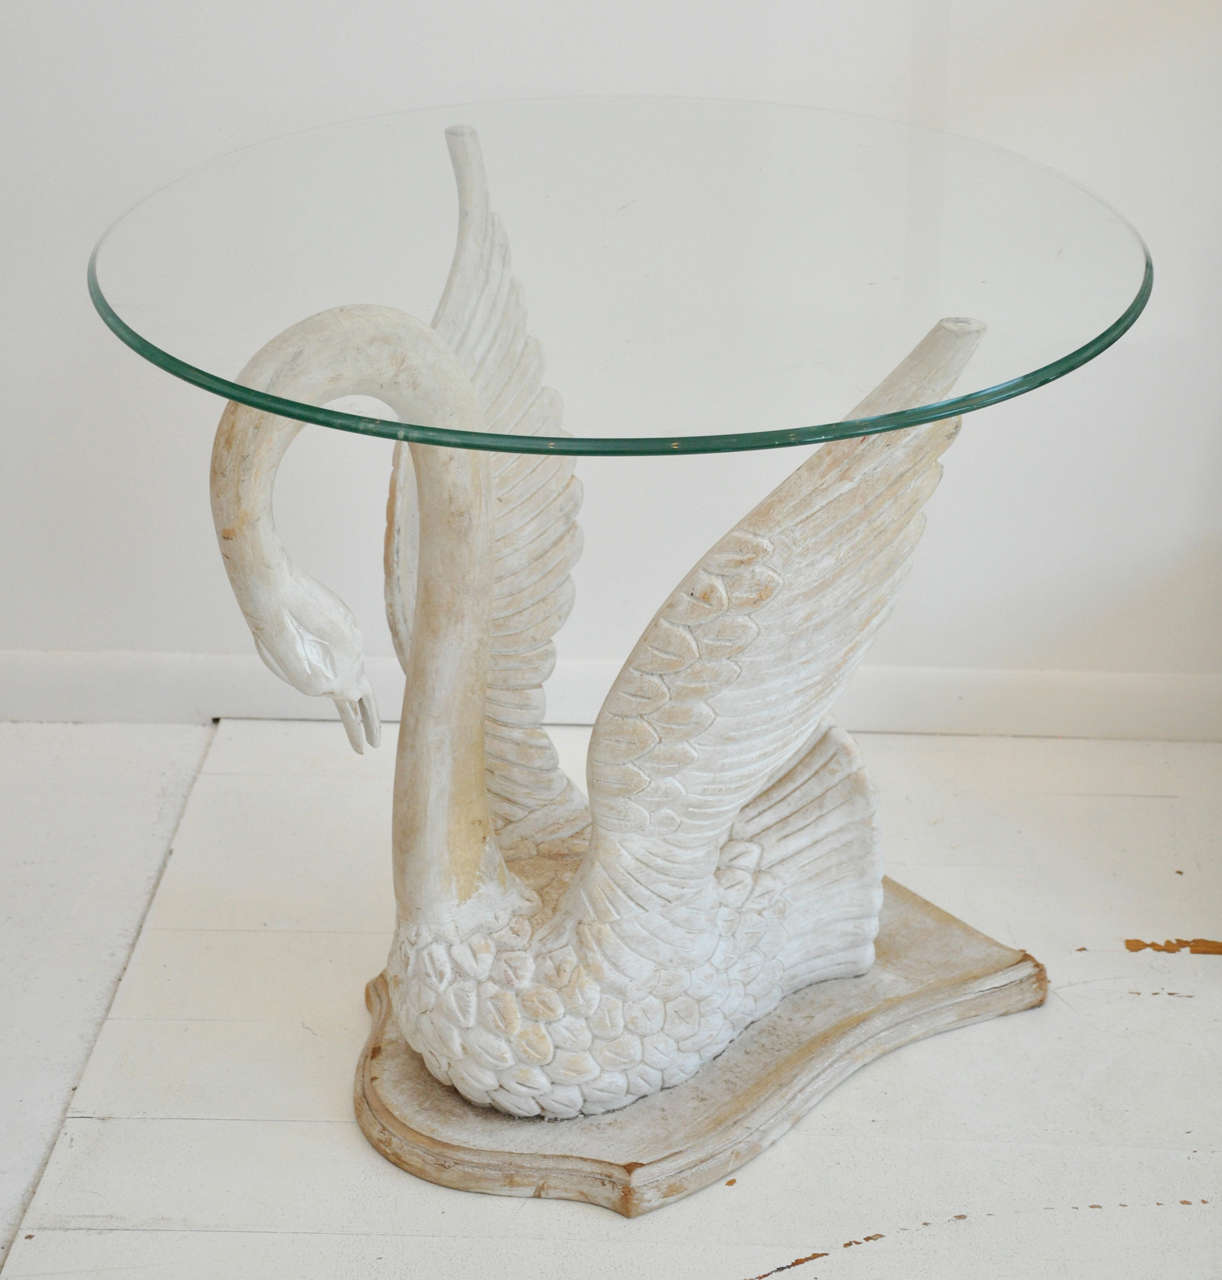 Antique Swan table base with glass top